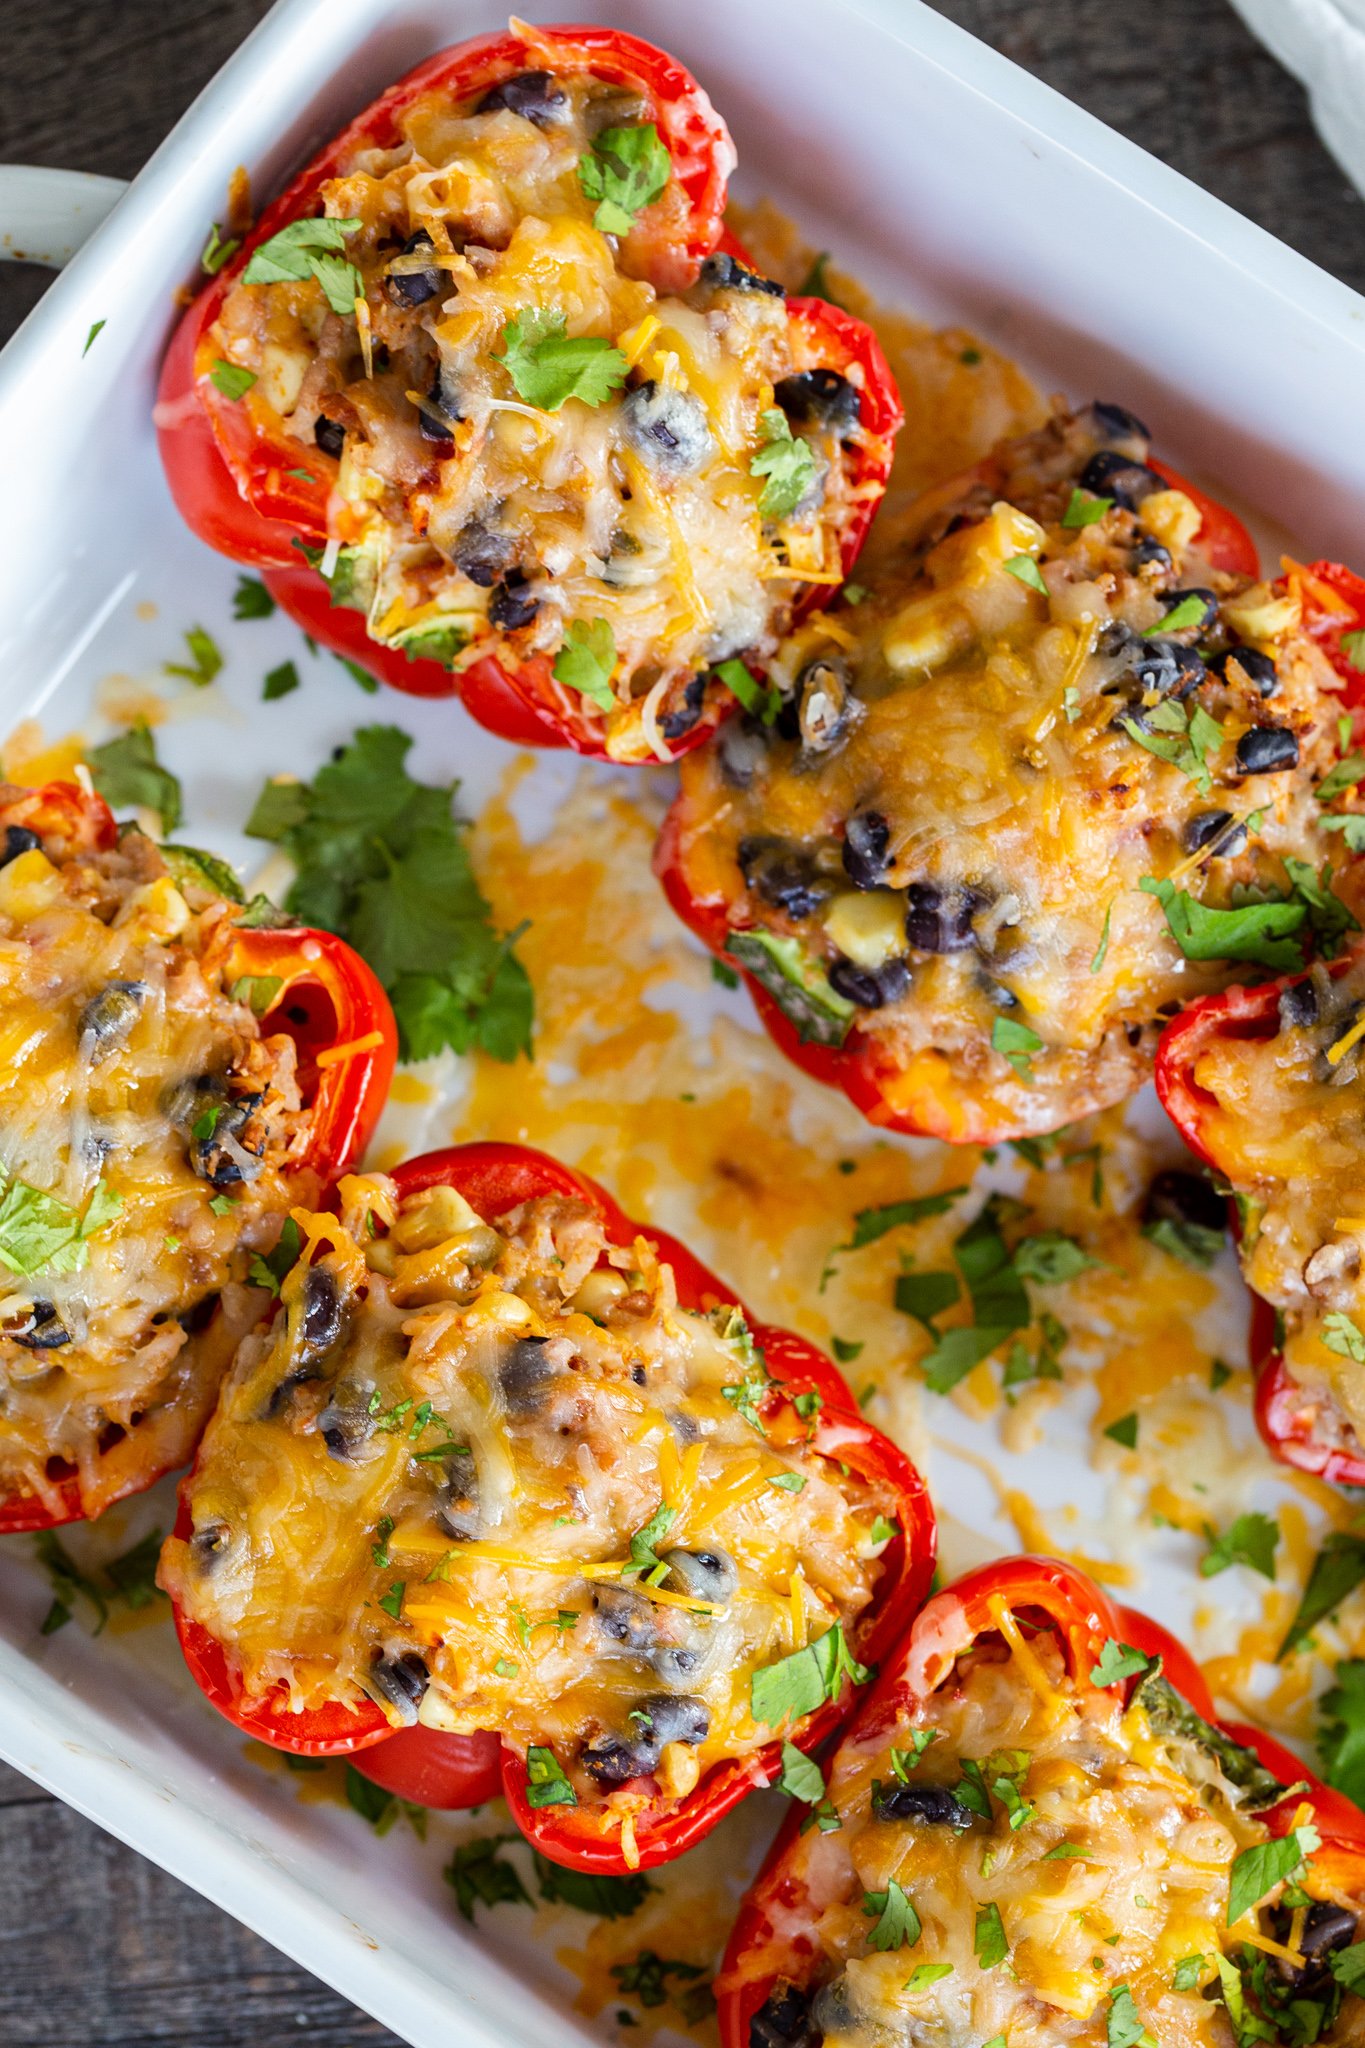 Mexican Stuffed Bell Peppers Recipe - Momsdish